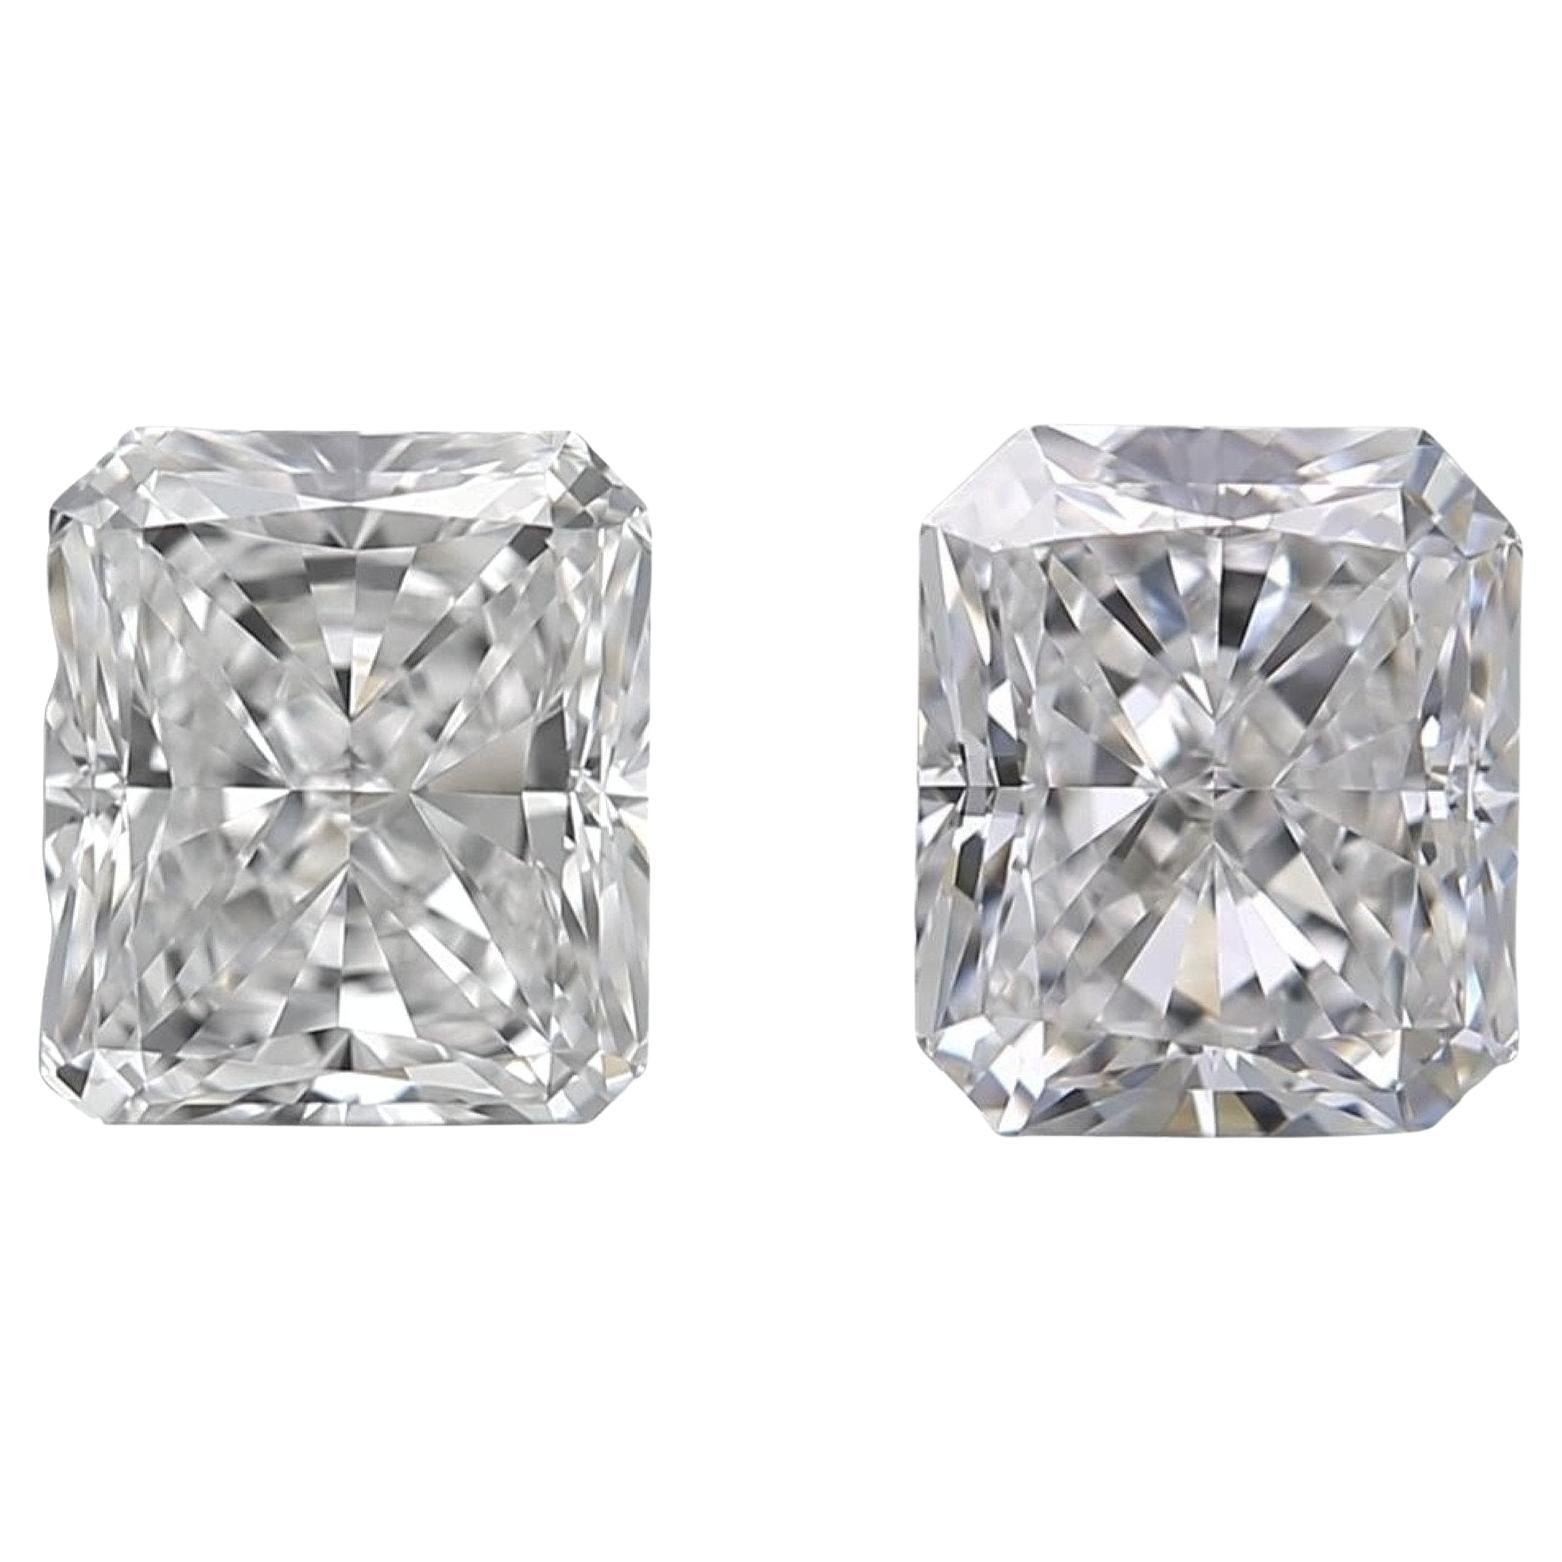 Dazzling 2 pcs Natural Diamonds with 1.41 ct Radiant D VVS1 GIA Certificate For Sale